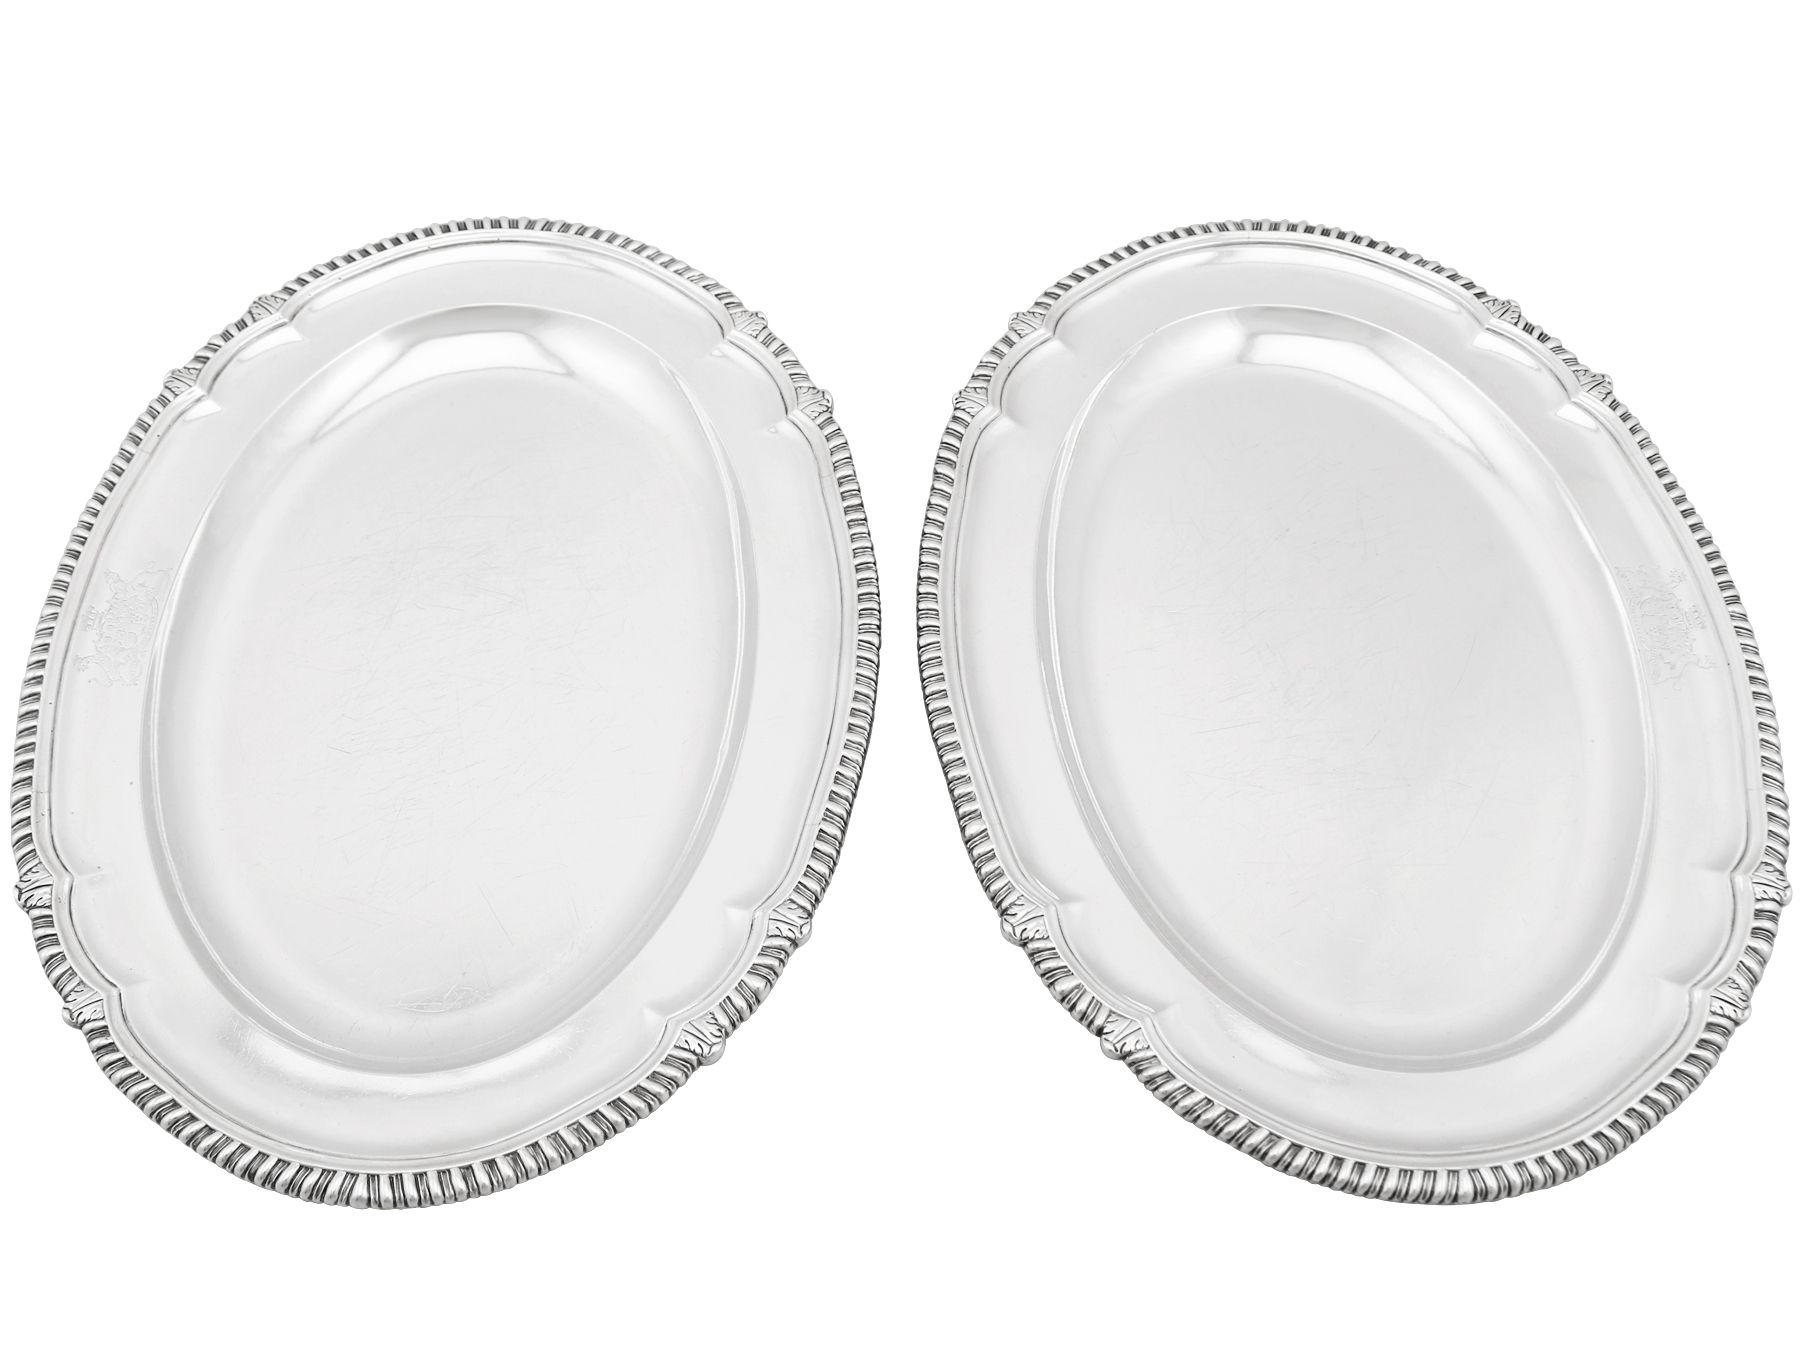 A fine and impressive pair of antique George IV English sterling silver meat platters; an addition to our silver dining collection.

These fine antique George IV sterling silver meat platters have an oval shaped incurved form with a sunken oval